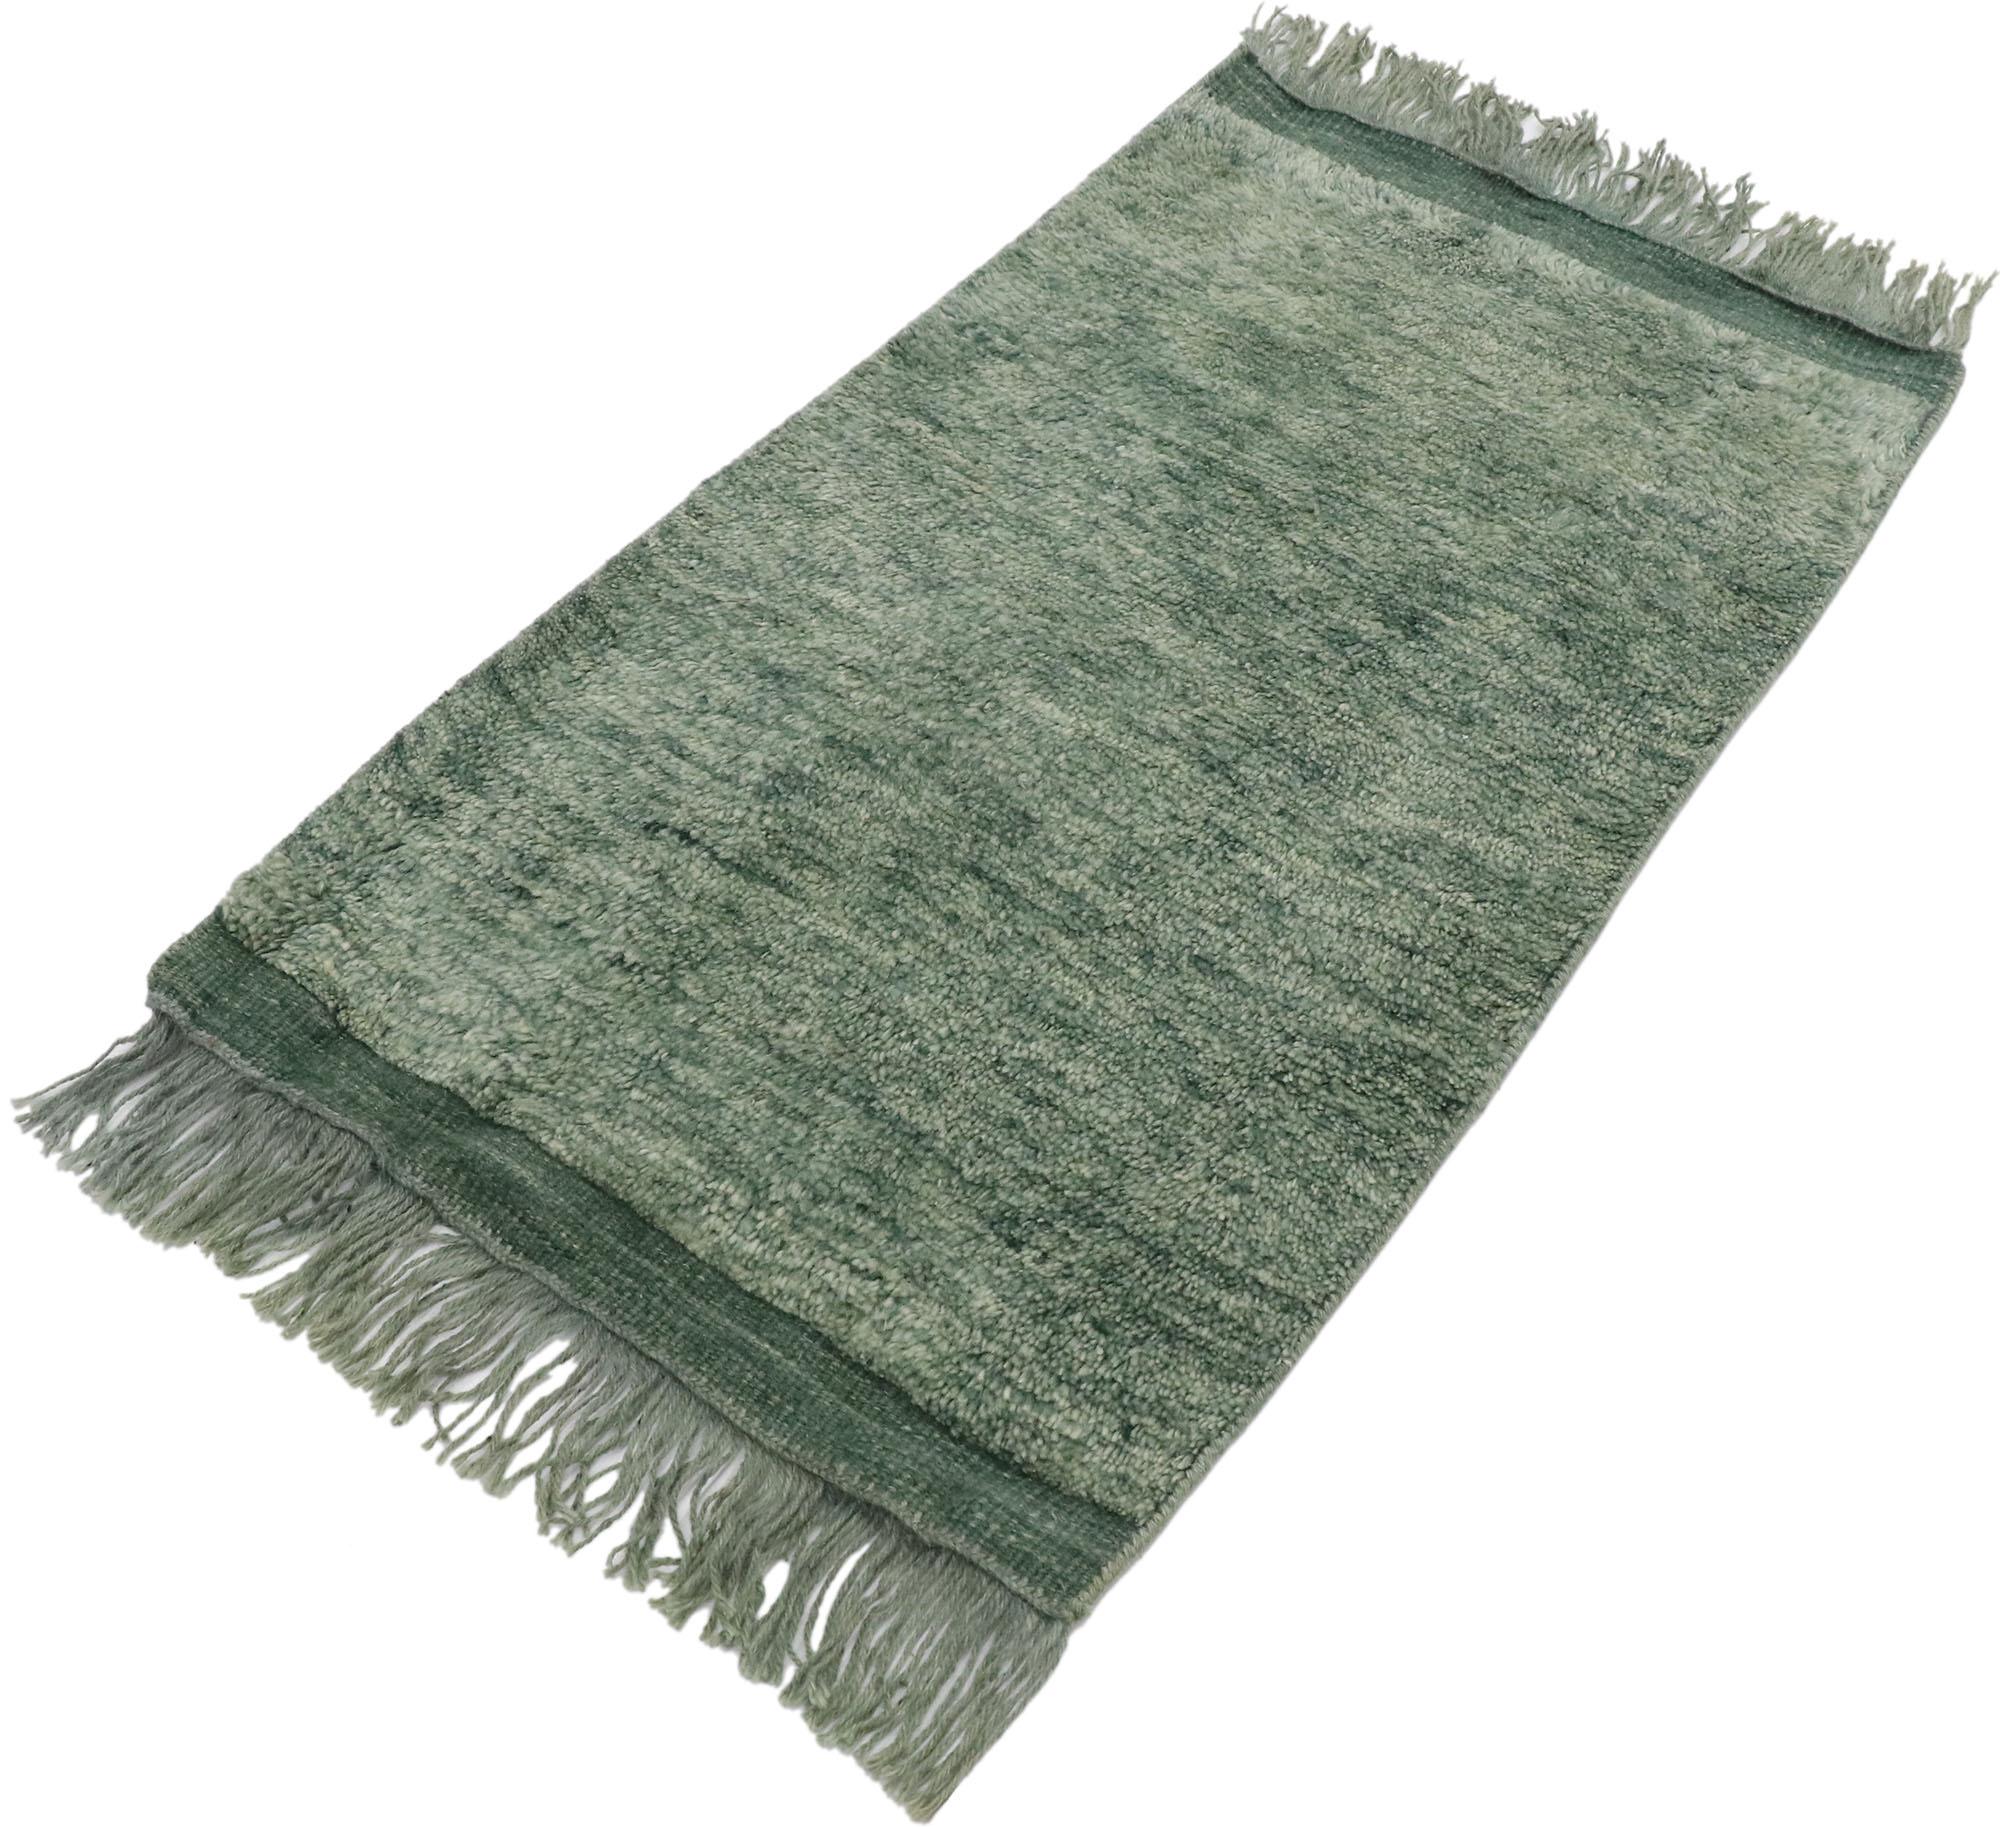 30600 Small Green Moroccan Rug, 02'00 x 03'05. Modern Indian Moroccan rugs offer a fresh take on traditional Moroccan rug designs, frequently produced in India. Inspired by the iconic motifs and patterns of authentic Moroccan rugs, including